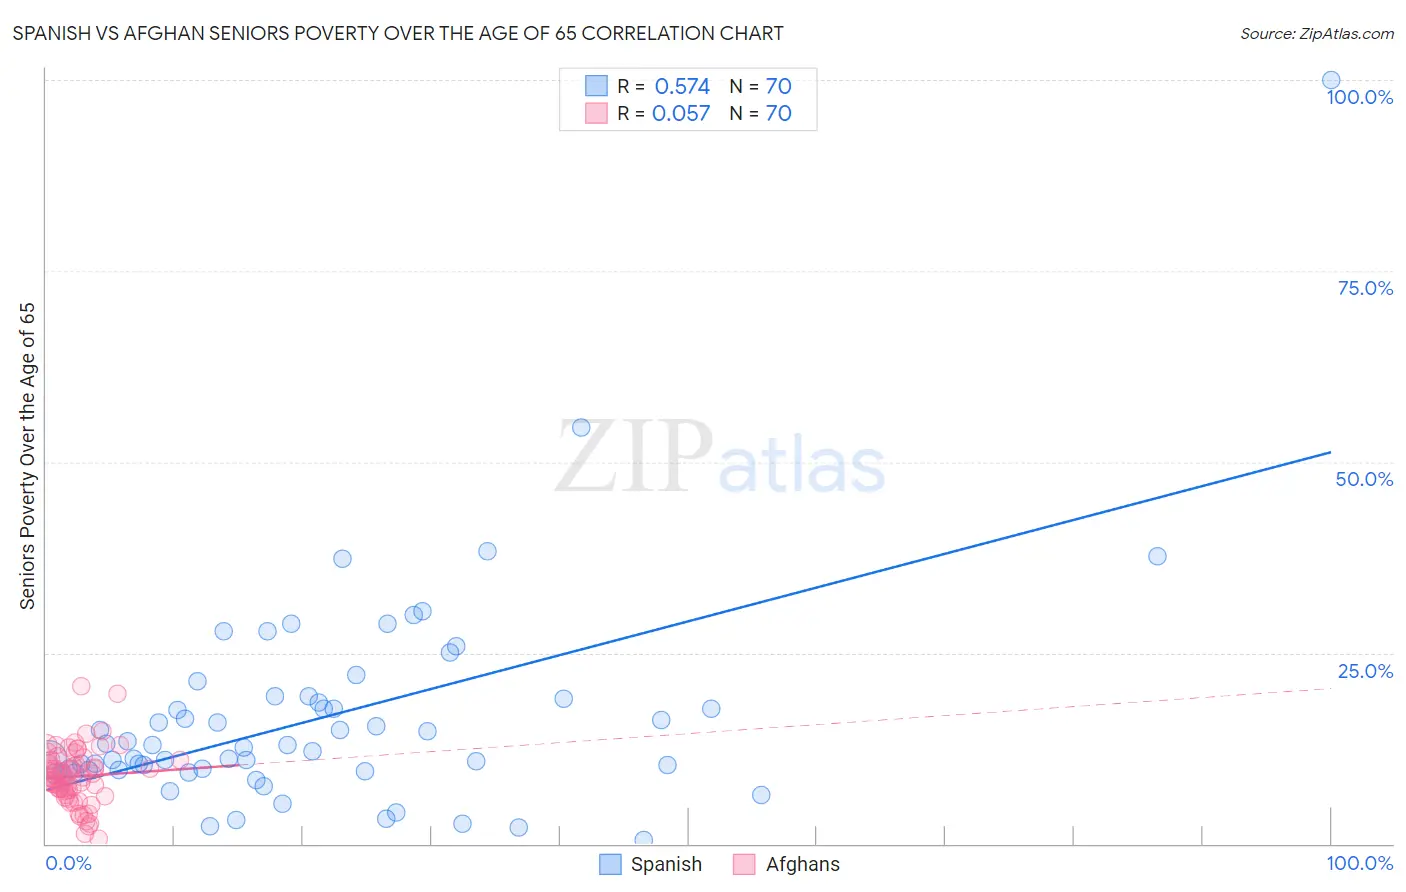 Spanish vs Afghan Seniors Poverty Over the Age of 65